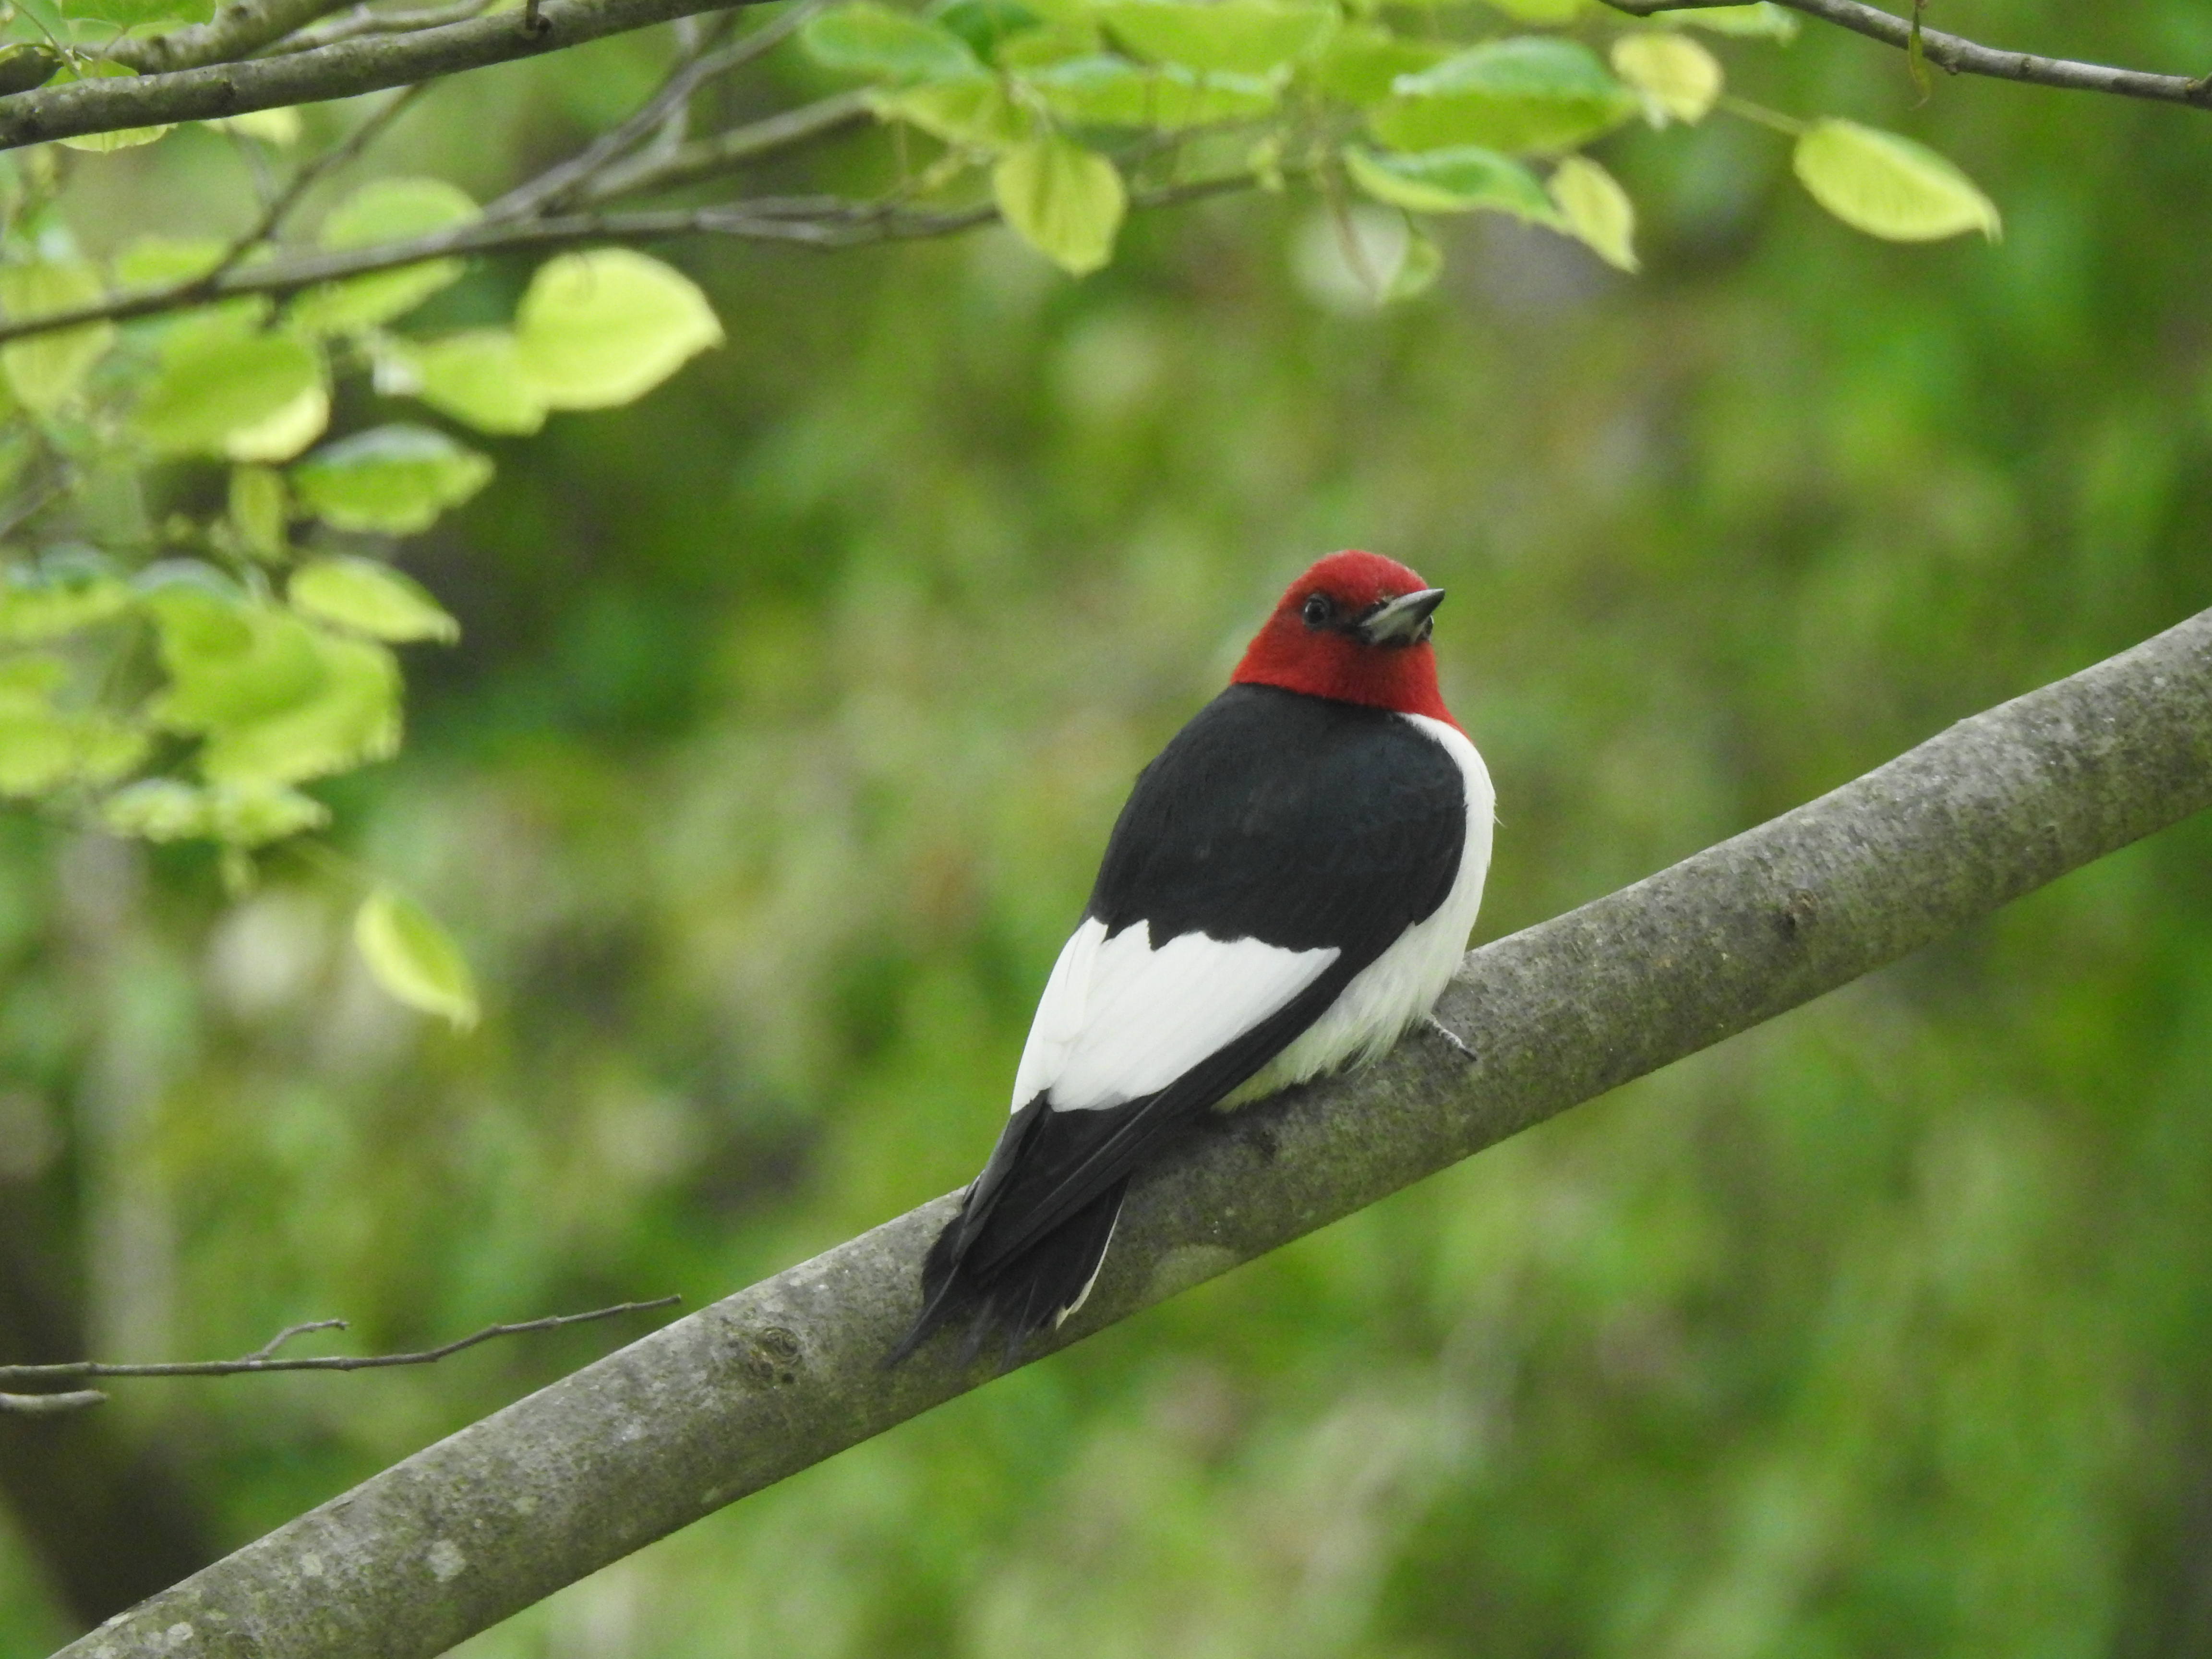 An image of a red-headed woodpecker sitting on a branch in a redbud tree.